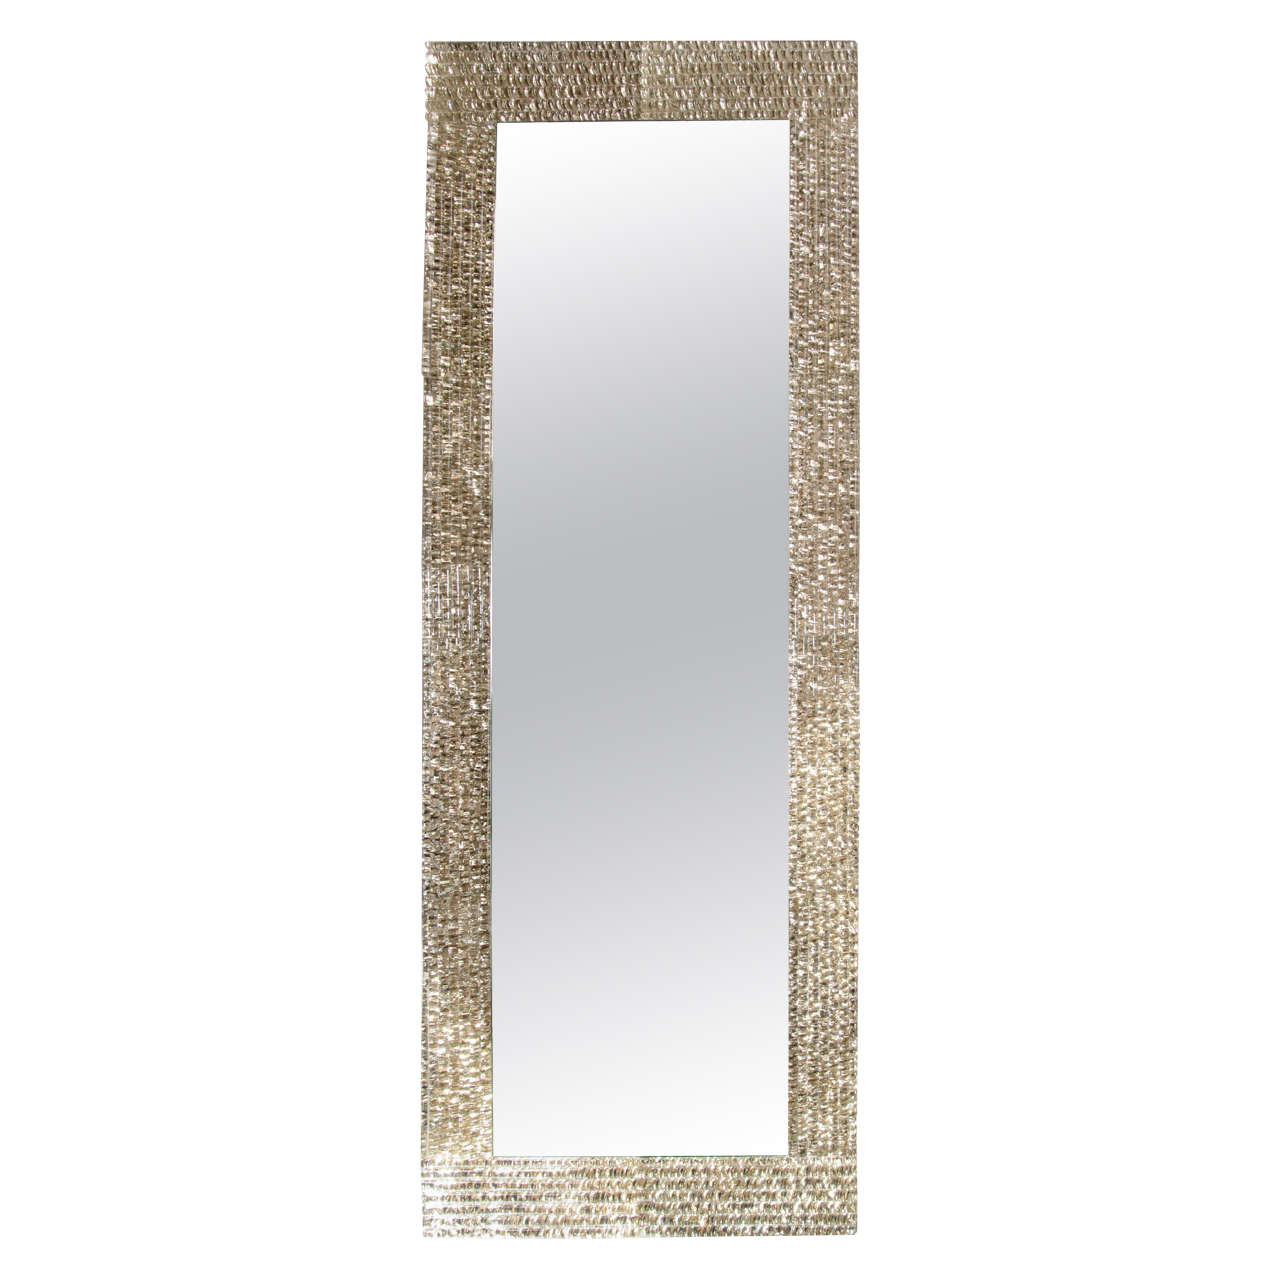 American 1970s Faceted Mercury Glass Mirror